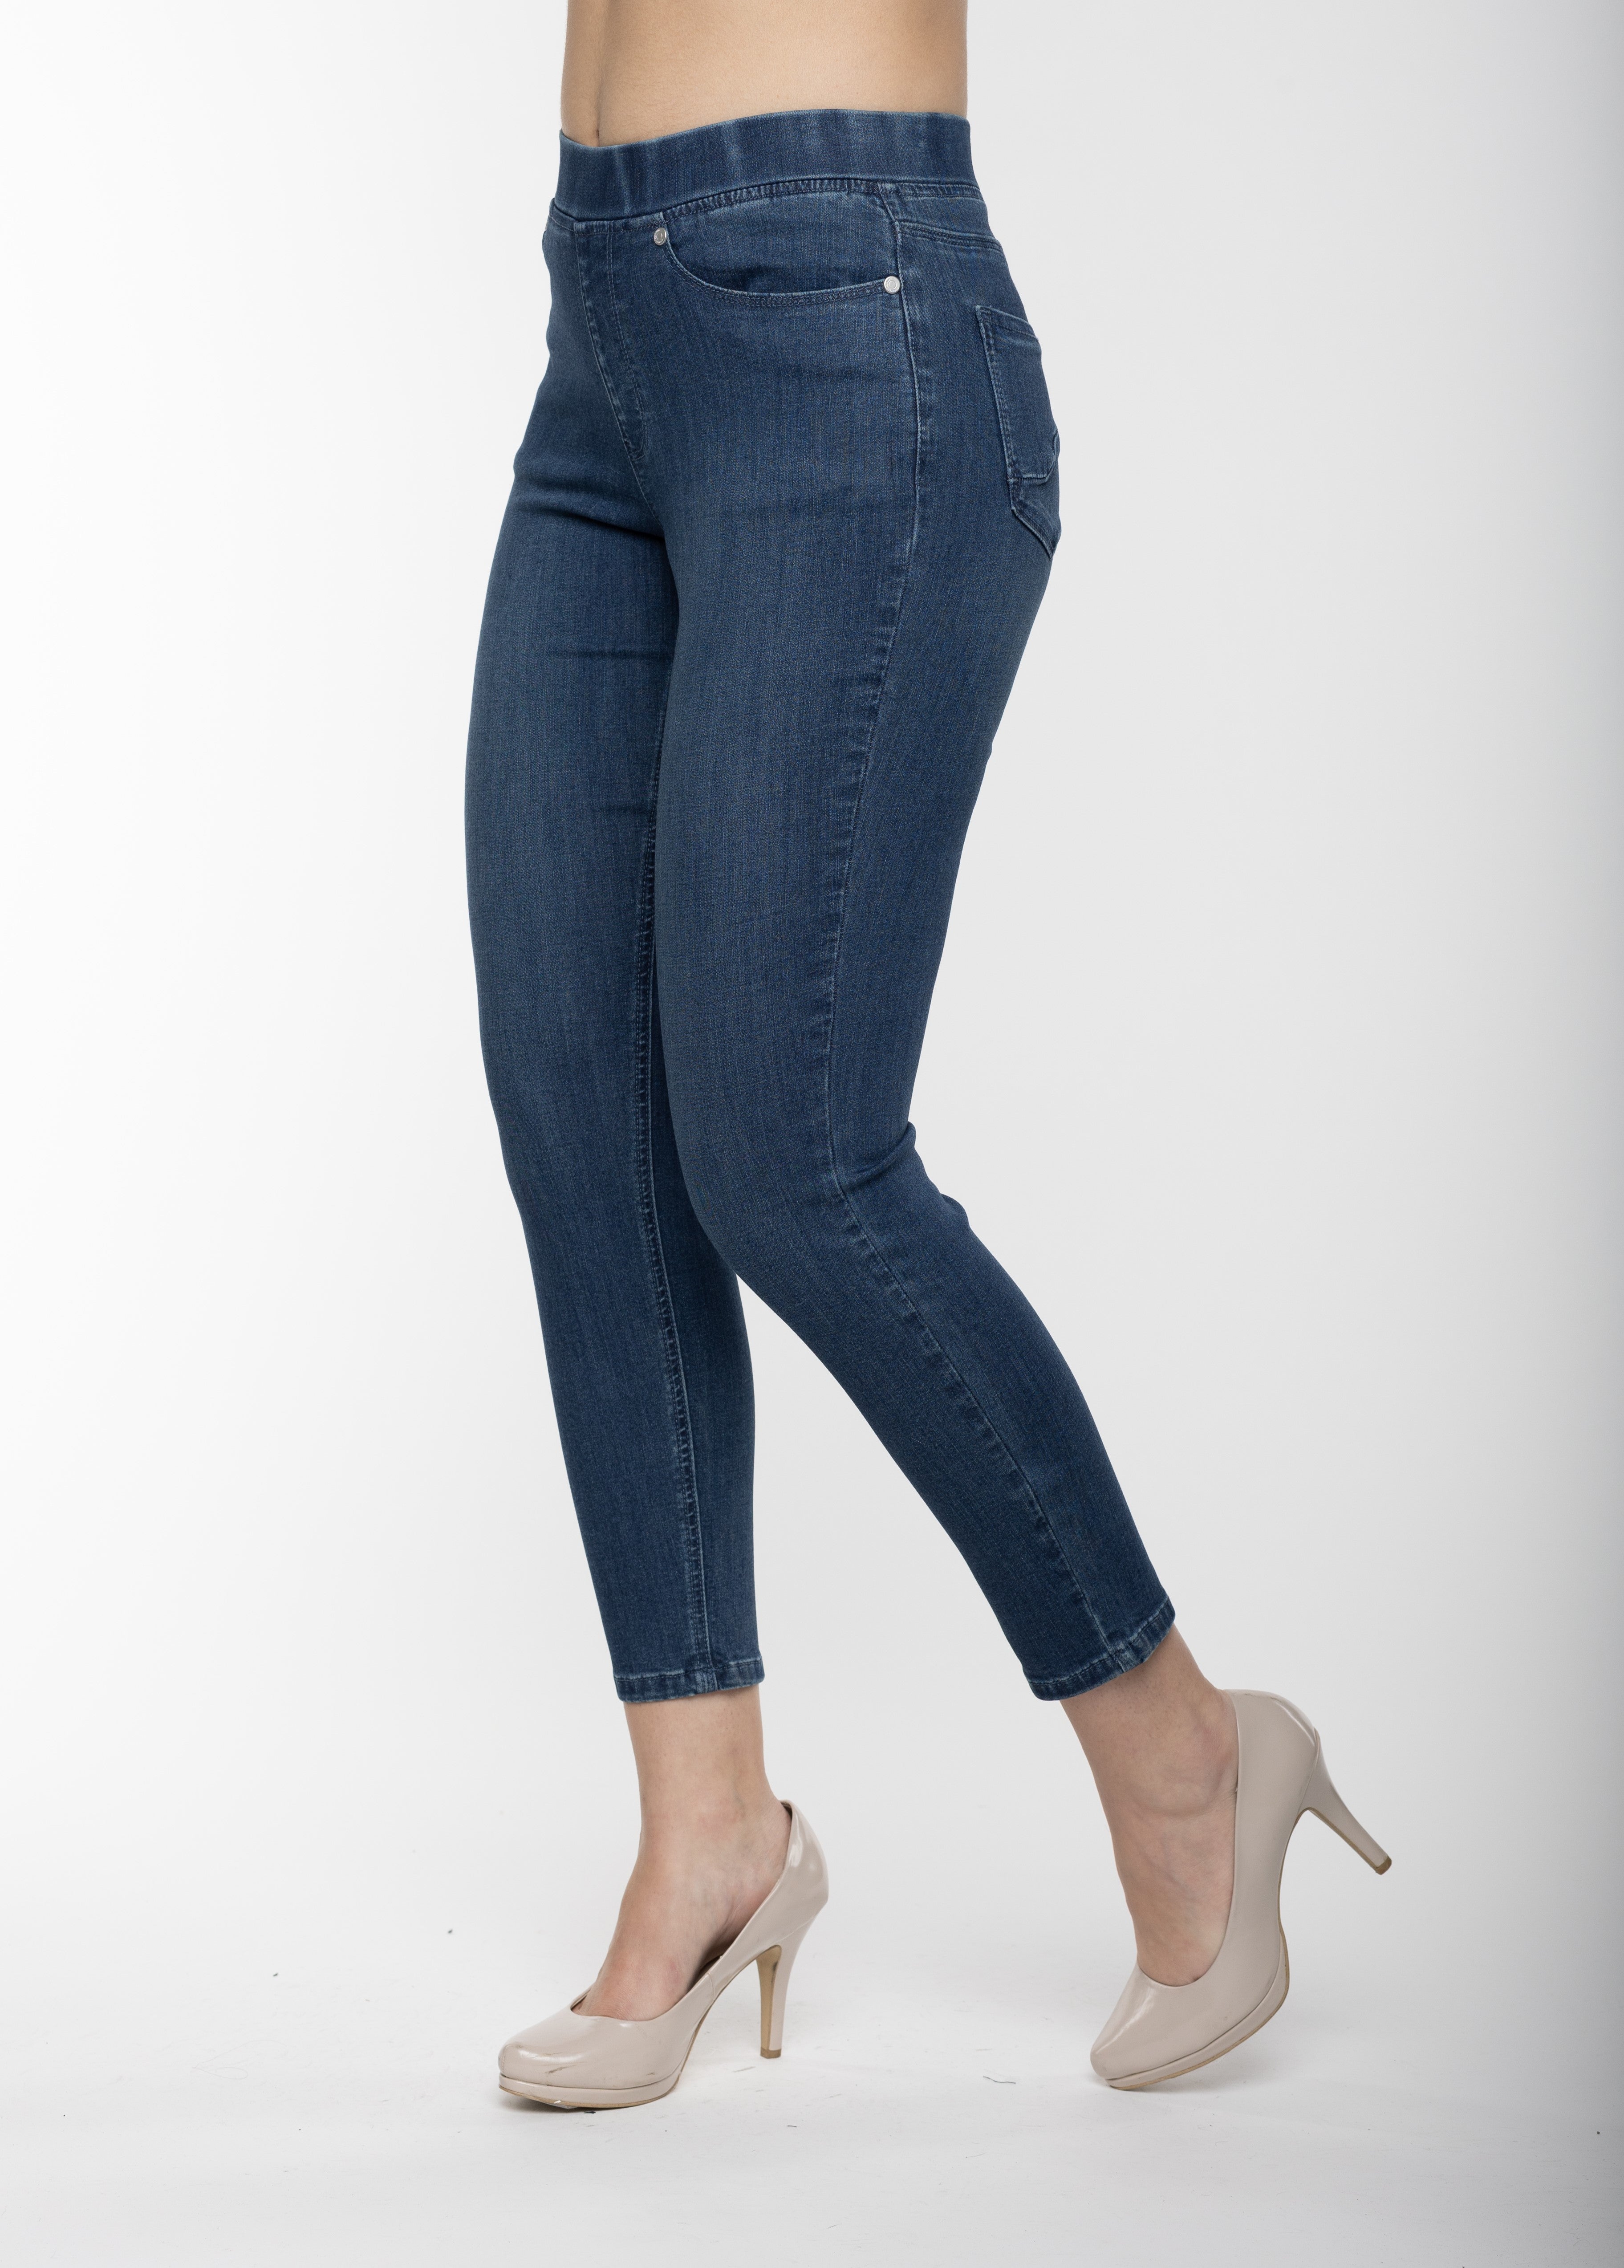 Carreli Jeans® | Premium Angela Fit Ankle Leg Length Pull-On in Stone Wash